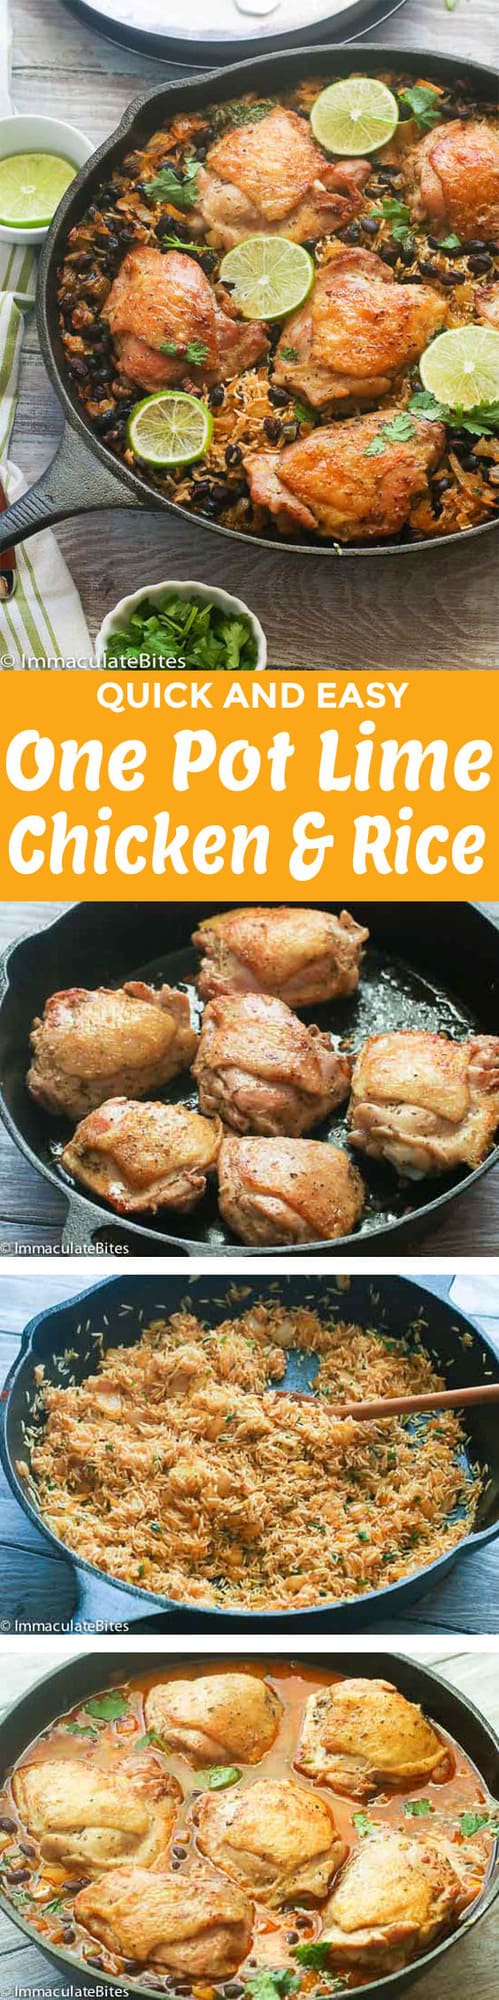 One Pot Lime Chicken and Rice